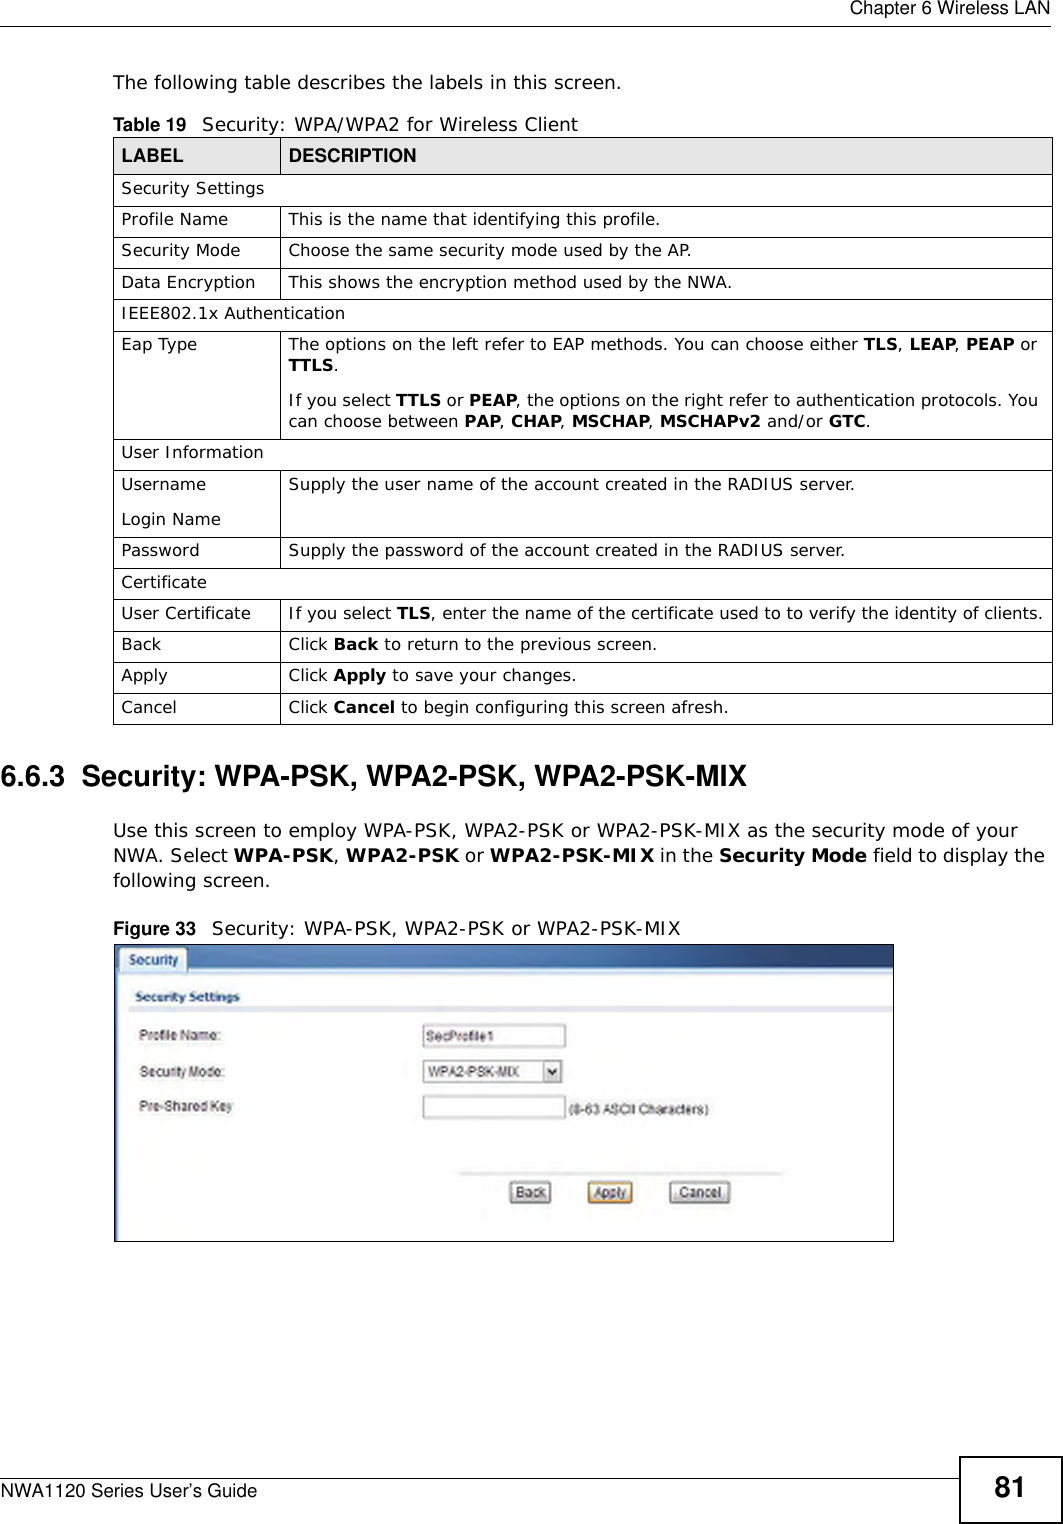  Chapter 6 Wireless LANNWA1120 Series User’s Guide 81The following table describes the labels in this screen.6.6.3  Security: WPA-PSK, WPA2-PSK, WPA2-PSK-MIXUse this screen to employ WPA-PSK, WPA2-PSK or WPA2-PSK-MIX as the security mode of your NWA. Select WPA-PSK, WPA2-PSK or WPA2-PSK-MIX in the Security Mode field to display the following screen.Figure 33   Security: WPA-PSK, WPA2-PSK or WPA2-PSK-MIXTable 19   Security: WPA/WPA2 for Wireless ClientLABEL DESCRIPTIONSecurity SettingsProfile Name This is the name that identifying this profile.Security Mode Choose the same security mode used by the AP.Data Encryption This shows the encryption method used by the NWA.IEEE802.1x AuthenticationEap Type The options on the left refer to EAP methods. You can choose either TLS, LEAP, PEAP or TTLS. If you select TTLS or PEAP, the options on the right refer to authentication protocols. You can choose between PAP, CHAP, MSCHAP, MSCHAPv2 and/or GTC.User InformationUsernameLogin NameSupply the user name of the account created in the RADIUS server.Password Supply the password of the account created in the RADIUS server.CertificateUser Certificate If you select TLS, enter the name of the certificate used to to verify the identity of clients.Back Click Back to return to the previous screen.Apply Click Apply to save your changes.Cancel Click Cancel to begin configuring this screen afresh.